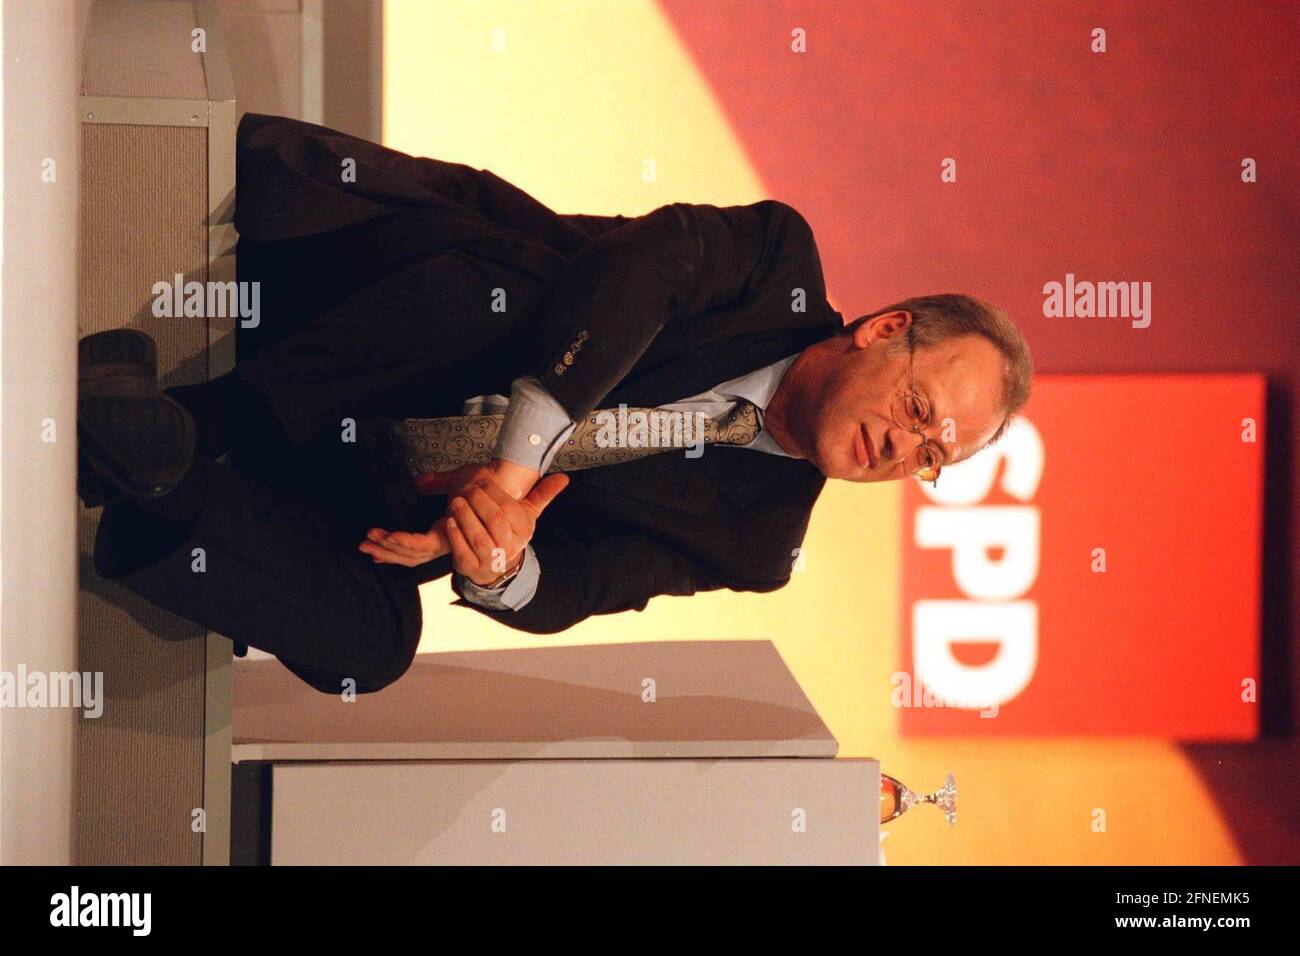 08 DEC 1999, BERLIN/GERMANY: Rudolf Scharping, SPD Vice Chairman, sits on a heel on the podium late at night, SPD Federal Party Congress, Hotel Estrell Rudolf Scharping, Fed. Minister of Defense and SPD Vice Chairman, during the Federal Party Congress of the Social Democratic Party IMAGE: 19991208-01/11-31 [automated translation] Stock Photo